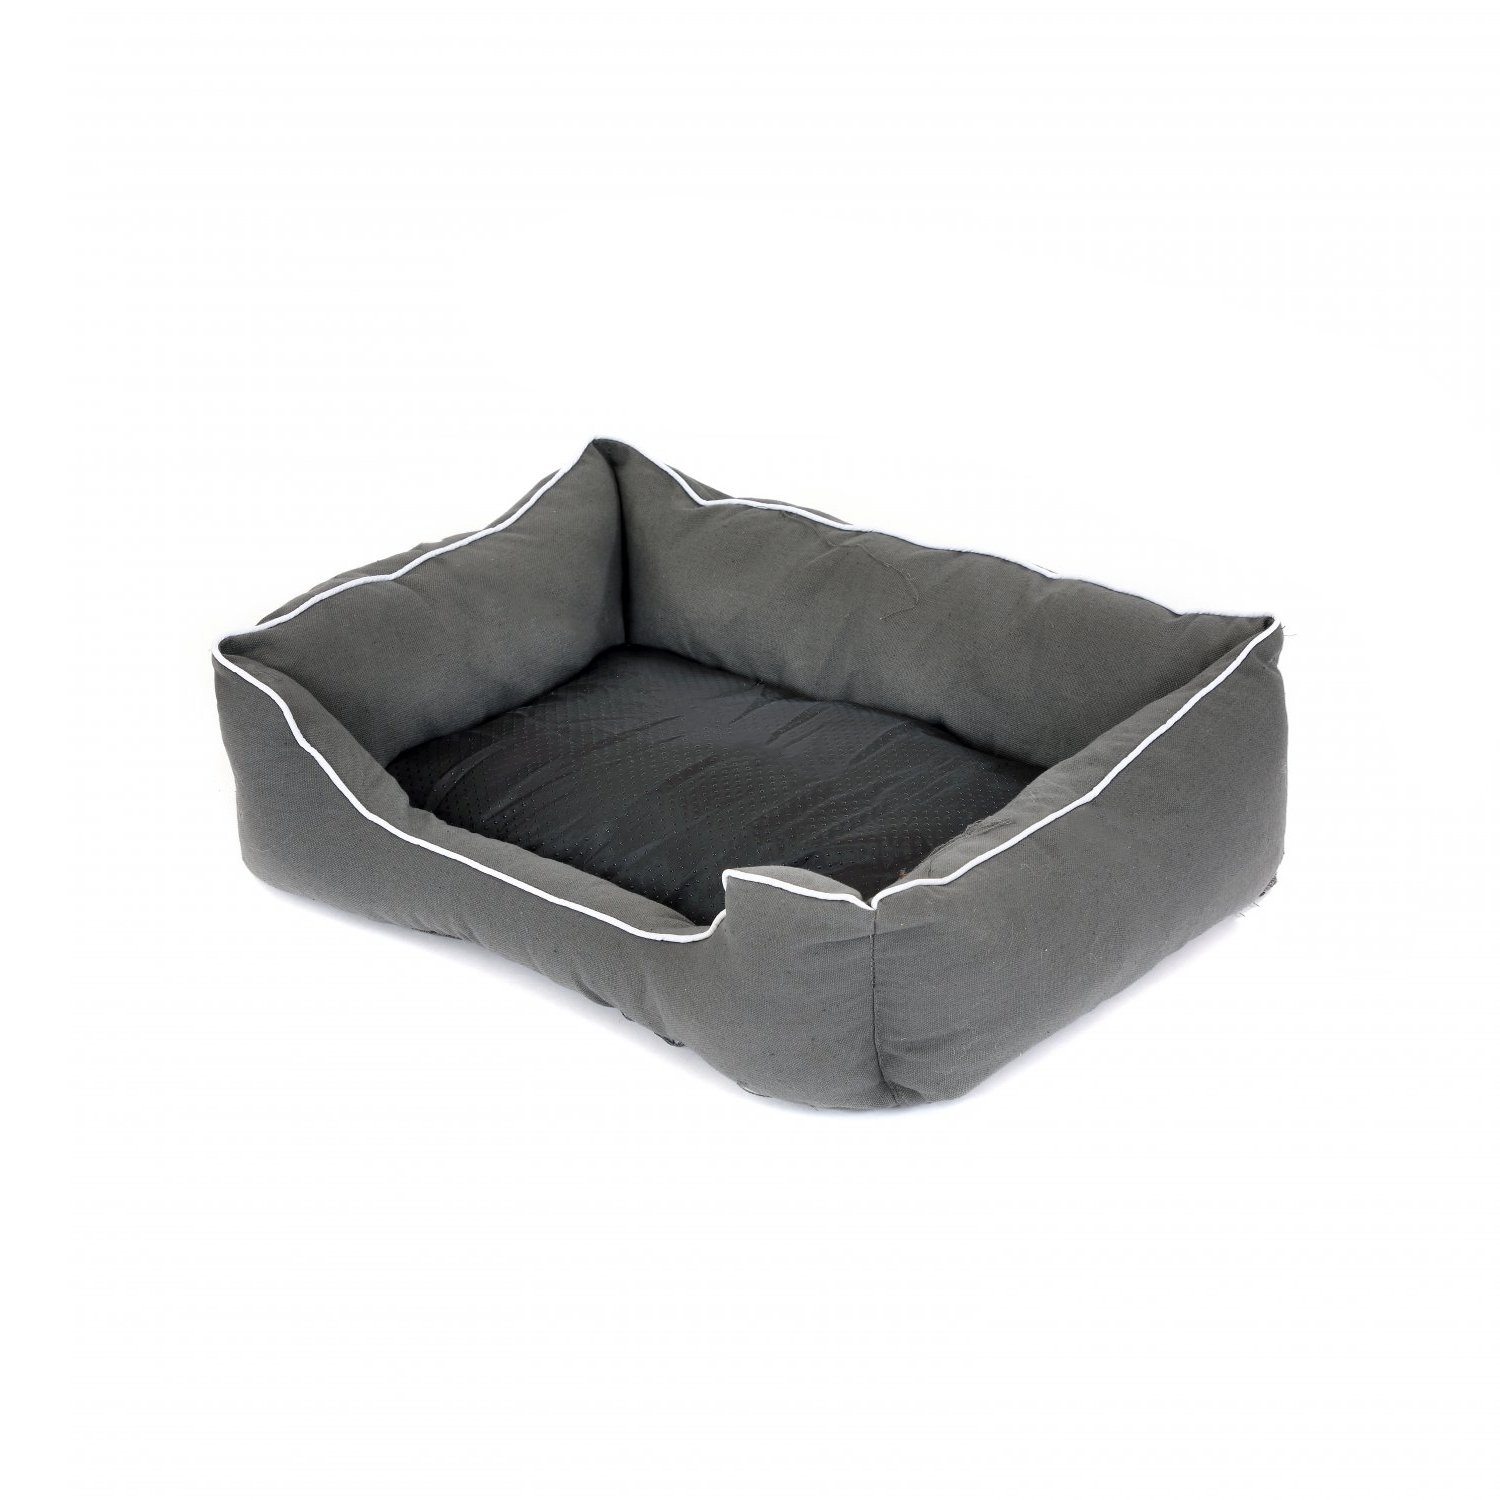 Deluxe Plush Soft Moisture Proof Small Sized Dog Bed - 50x37cm